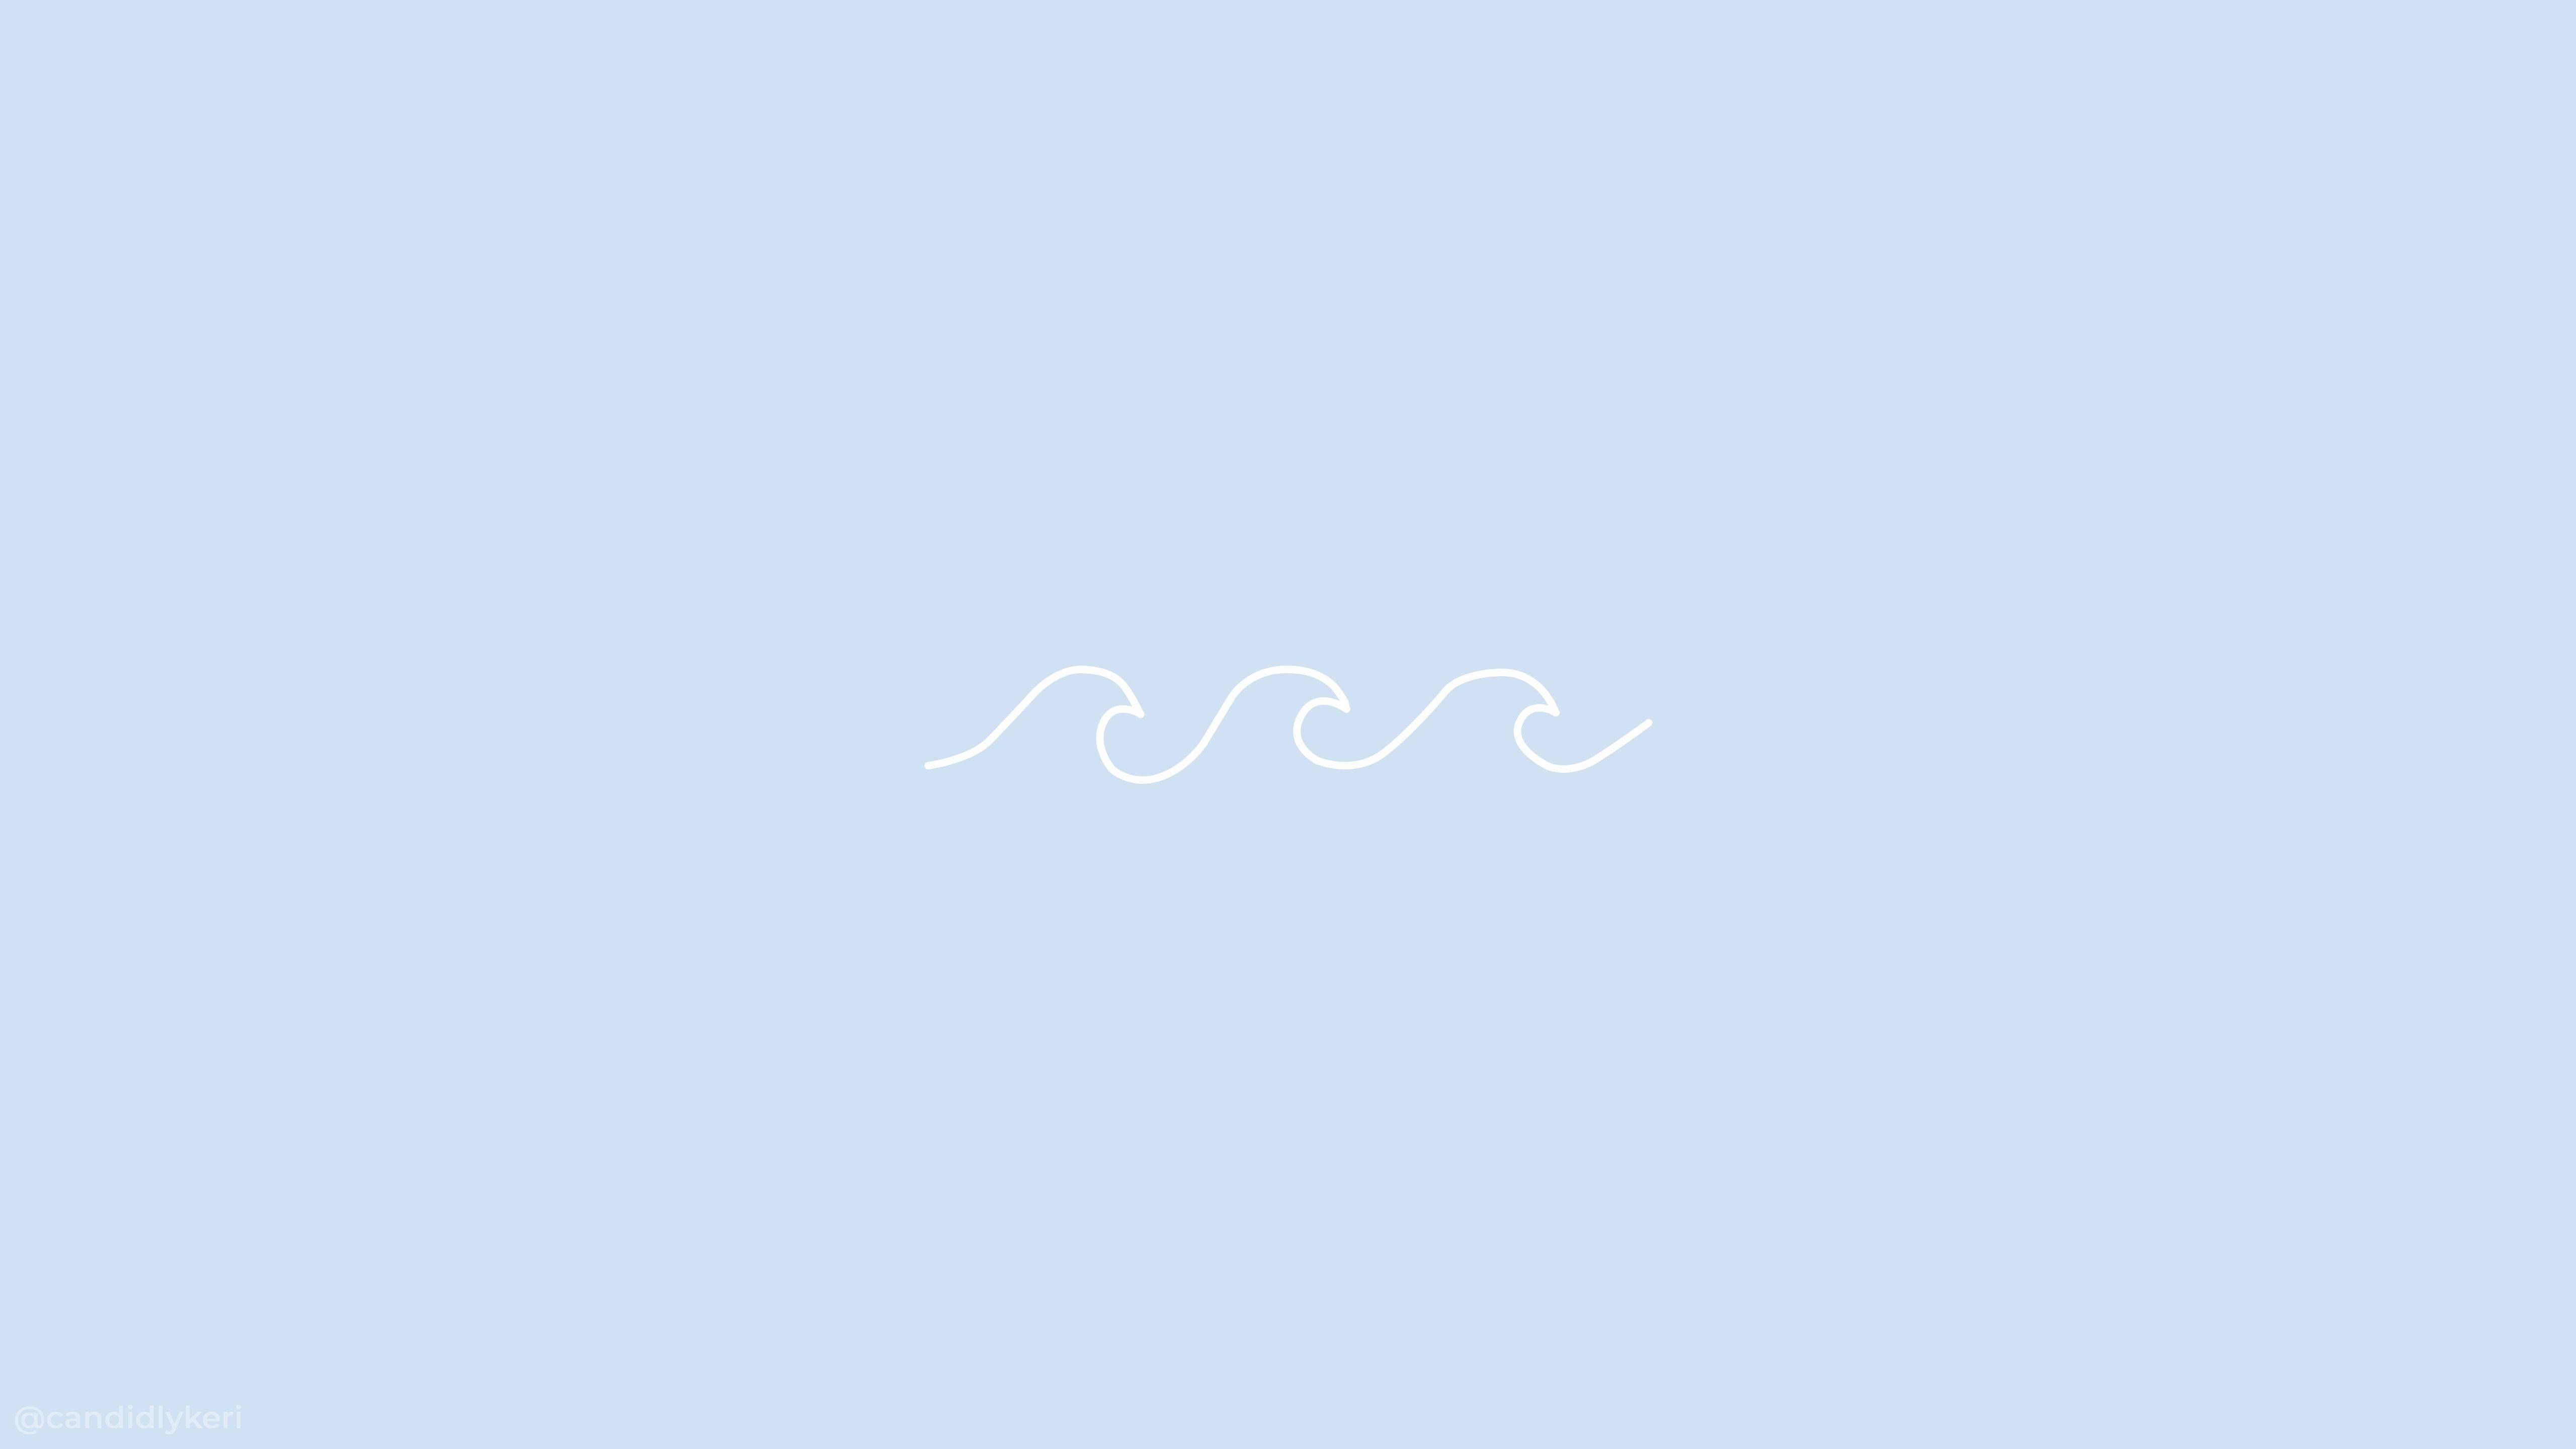 A wave in the ocean on blue background - Wave, simple